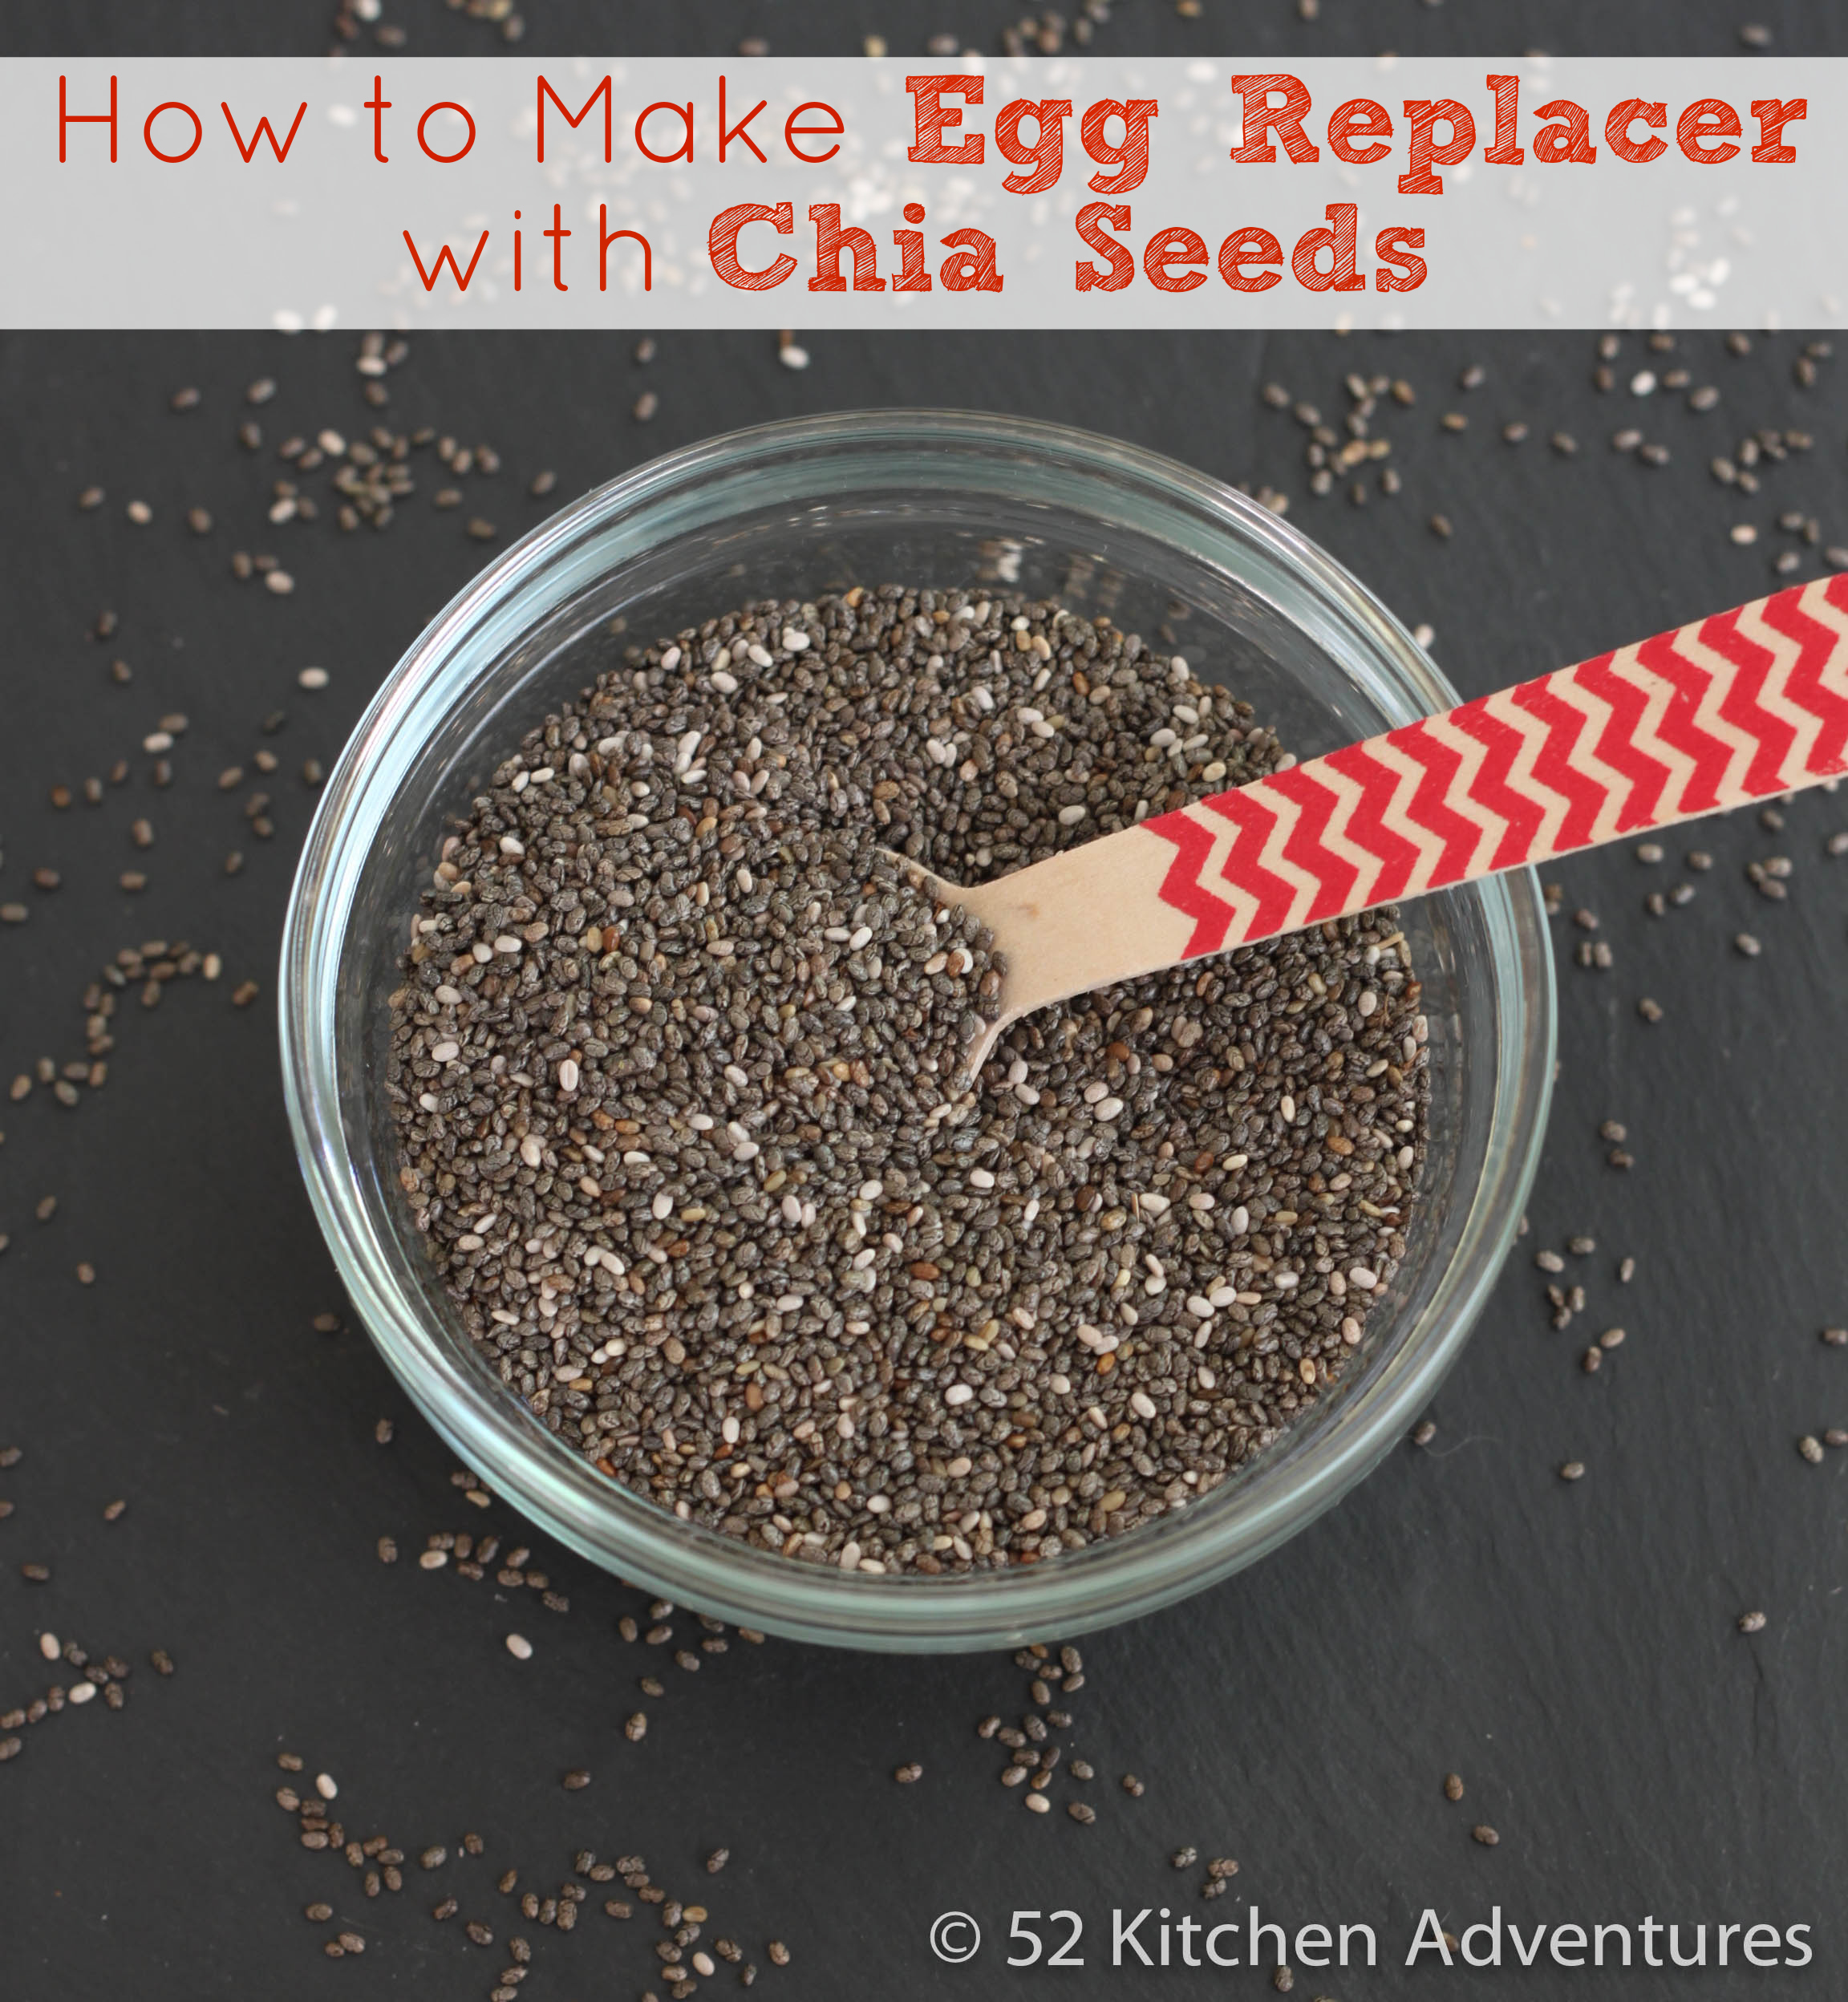 How to Make Egg Replacer with Chia Seeds